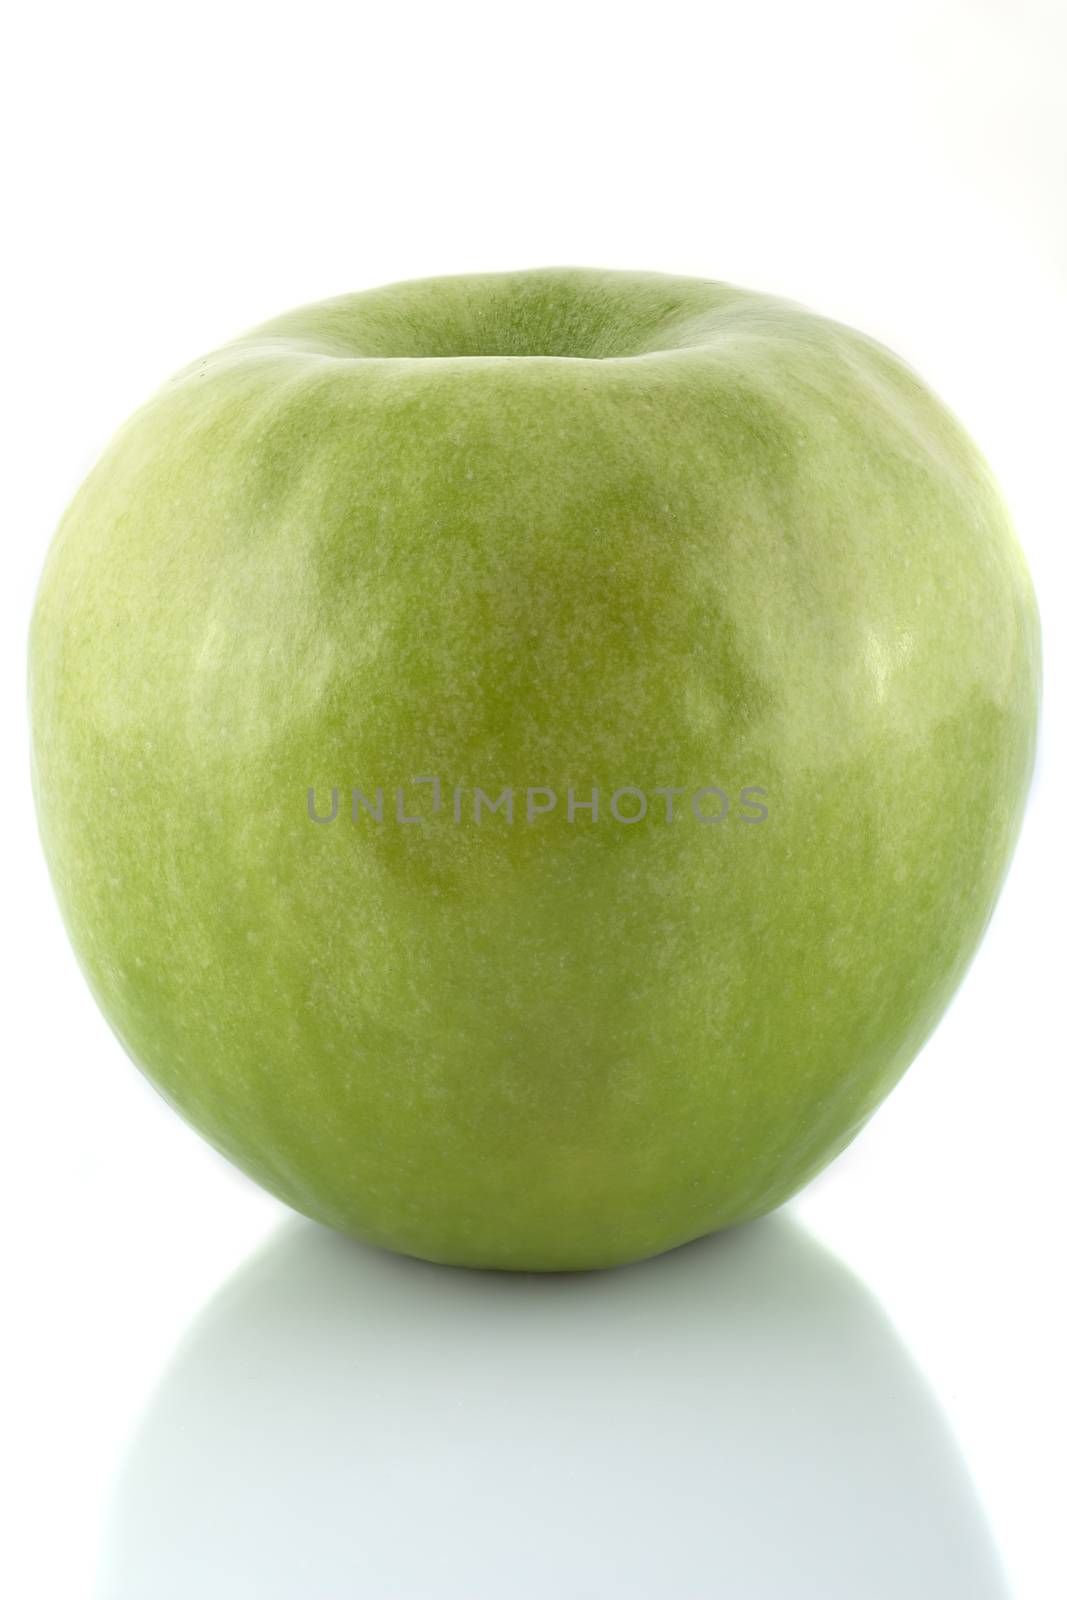 Juicy green apple isolated on a white background.